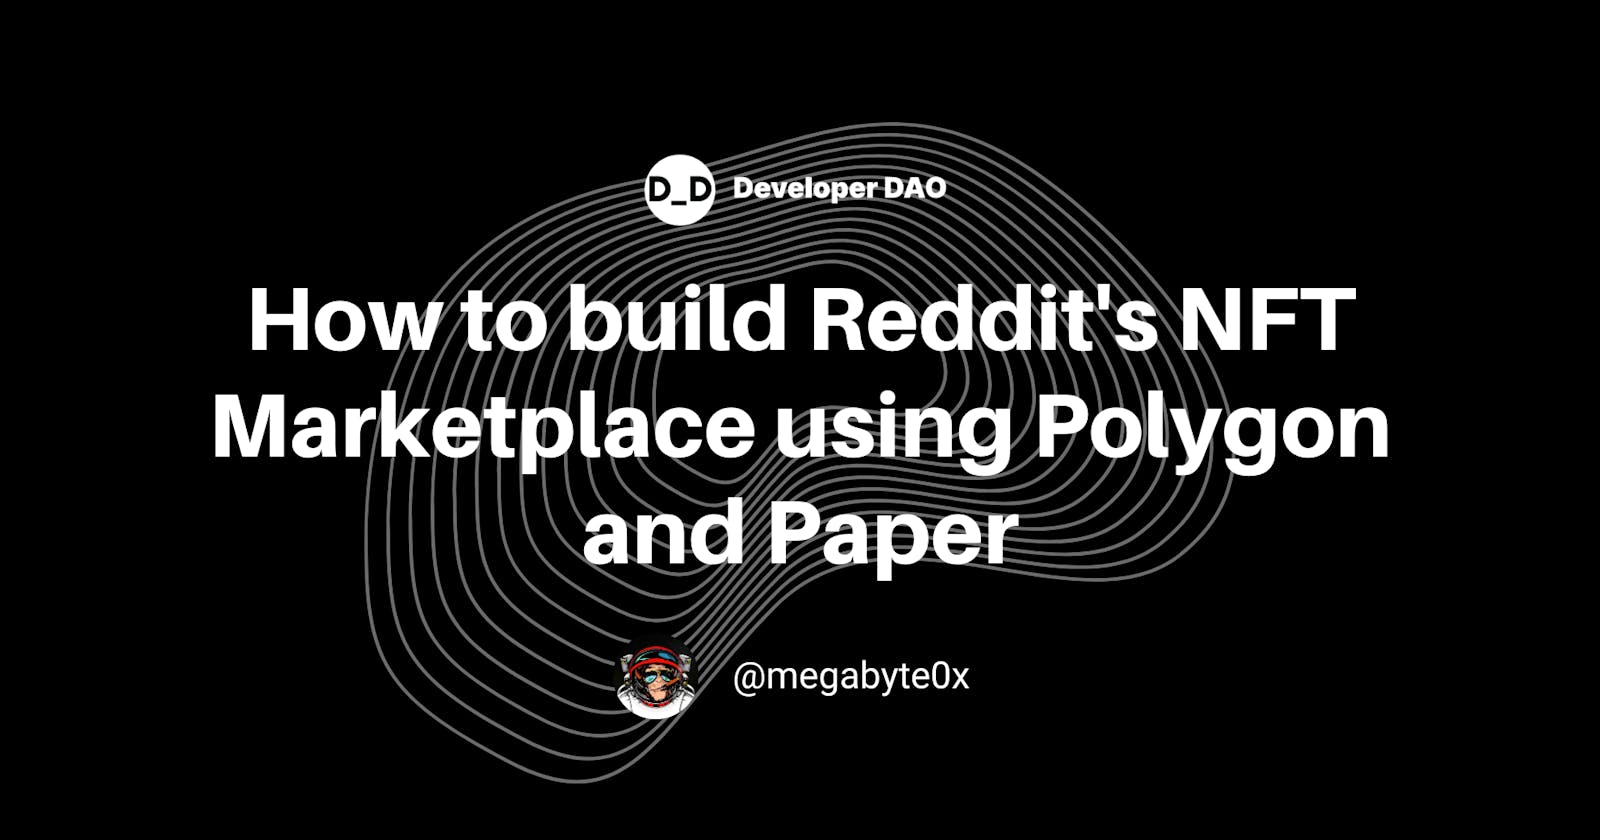 How to build Reddit's NFT Marketplace using Polygon and Paper 📄